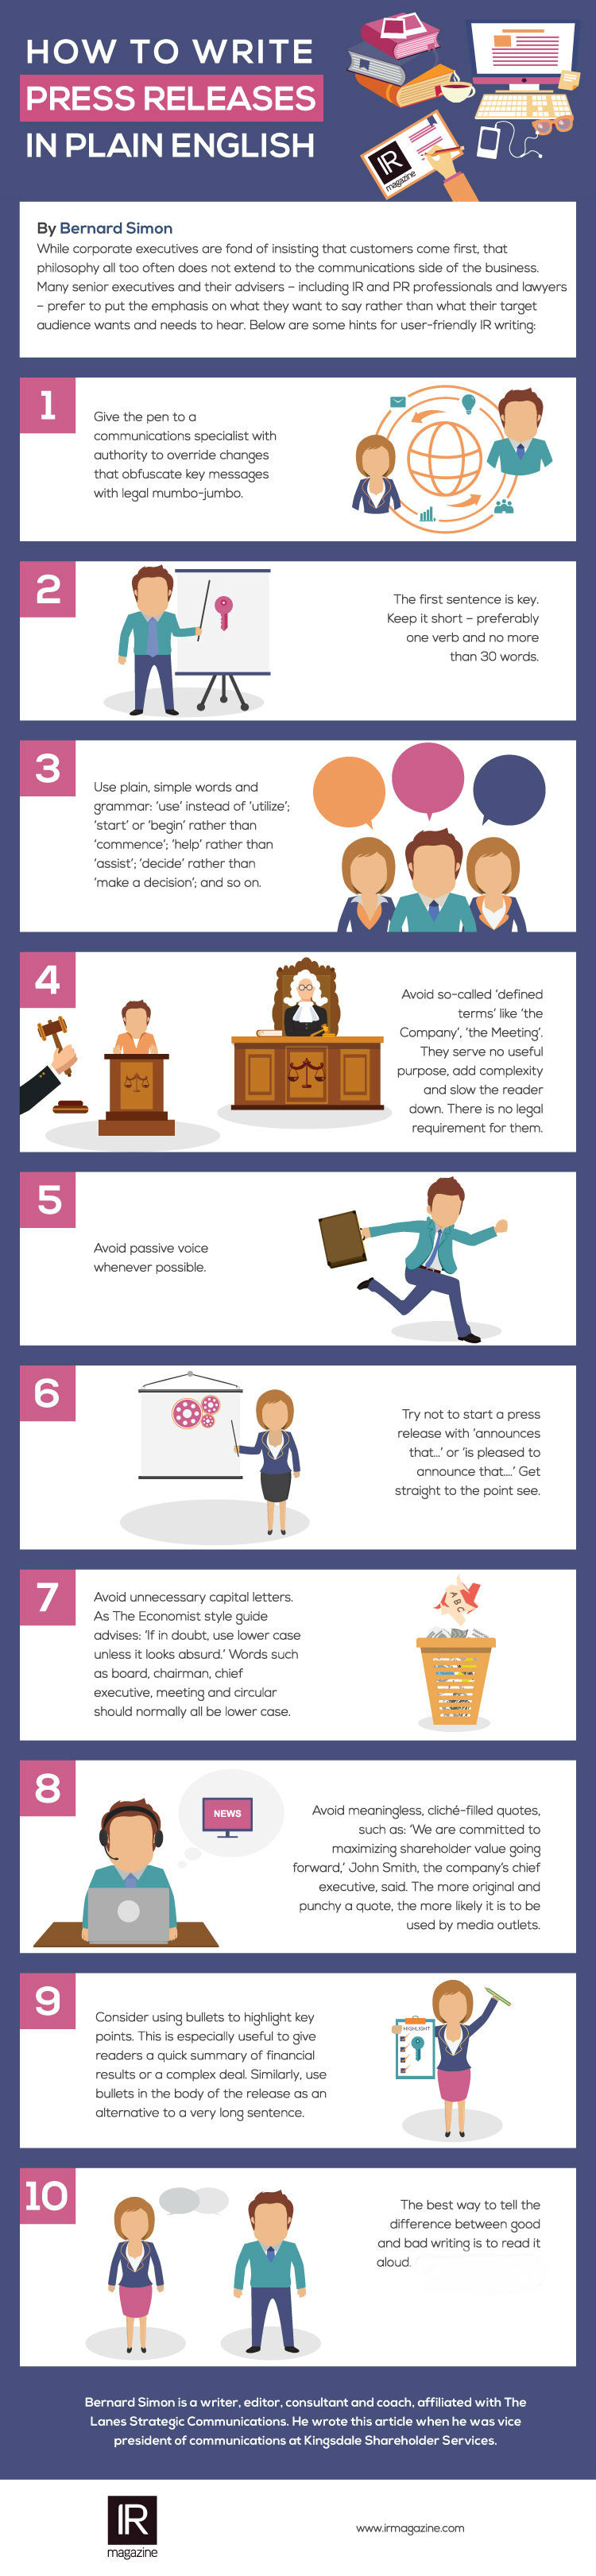 Infographic on writing press releases in plain English